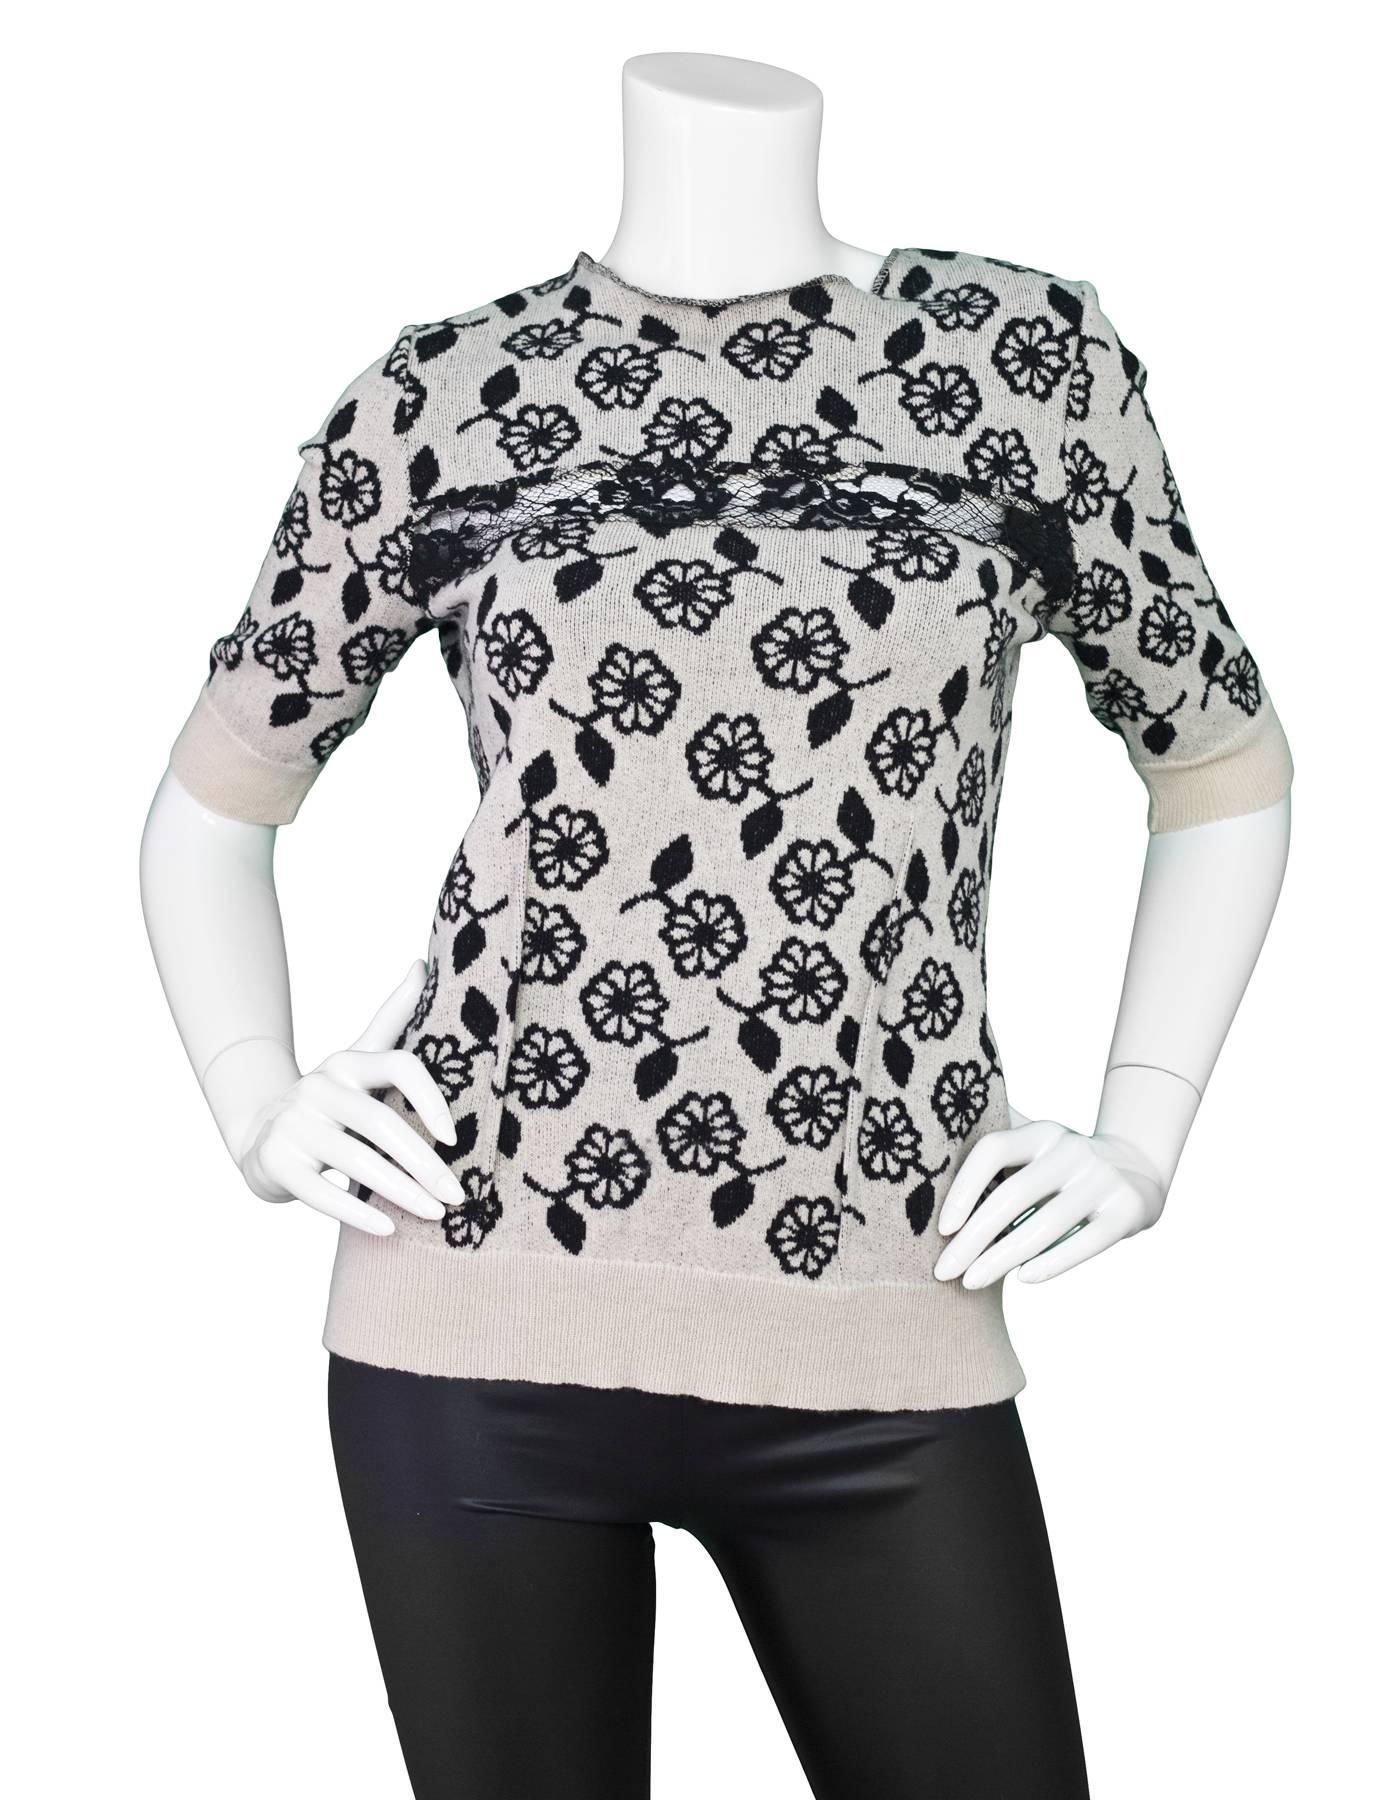 Nina Ricci Black & White Cashmere Short Sleeve Sweater
Features black lace detail at bustline

Made In: France
Color: Black and white
Composition: 92% wool, 8% cashmere
Lining: None
Closure/Opening: Pull over
Exterior Pockets: None
Interior 